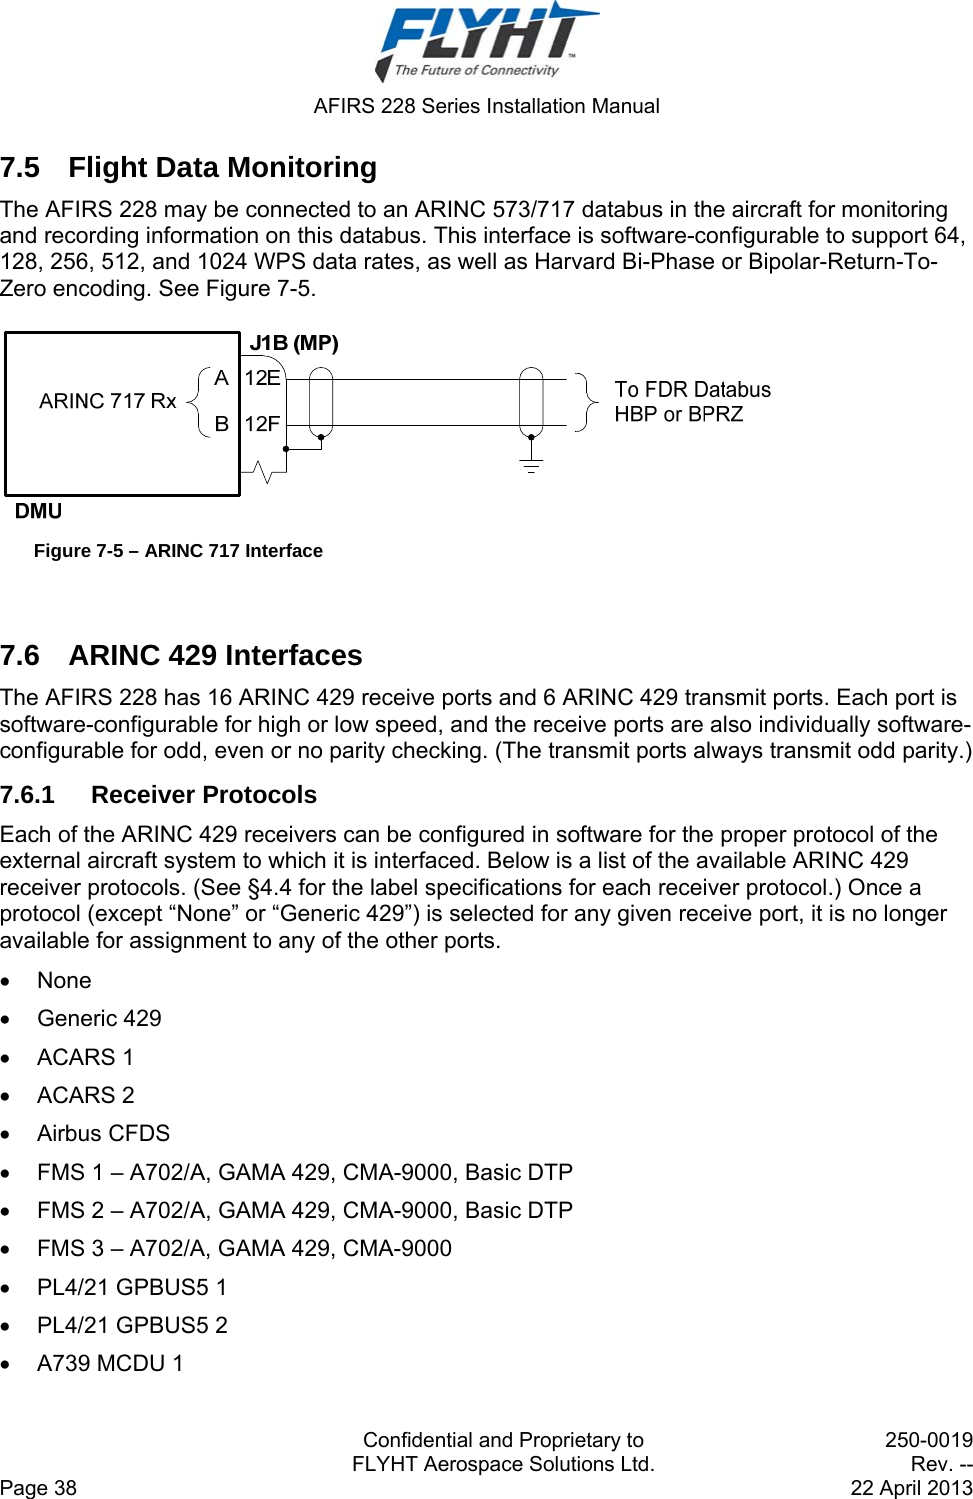  AFIRS 228 Series Installation Manual   Confidential and Proprietary to  250-0019   FLYHT Aerospace Solutions Ltd.  Rev. -- Page 38    22 April 2013 7.5  Flight Data Monitoring The AFIRS 228 may be connected to an ARINC 573/717 databus in the aircraft for monitoring and recording information on this databus. This interface is software-configurable to support 64, 128, 256, 512, and 1024 WPS data rates, as well as Harvard Bi-Phase or Bipolar-Return-To-Zero encoding. See Figure 7-5.   Figure 7-5 – ARINC 717 Interface  7.6  ARINC 429 Interfaces The AFIRS 228 has 16 ARINC 429 receive ports and 6 ARINC 429 transmit ports. Each port is software-configurable for high or low speed, and the receive ports are also individually software-configurable for odd, even or no parity checking. (The transmit ports always transmit odd parity.) 7.6.1 Receiver Protocols Each of the ARINC 429 receivers can be configured in software for the proper protocol of the external aircraft system to which it is interfaced. Below is a list of the available ARINC 429 receiver protocols. (See §4.4 for the label specifications for each receiver protocol.) Once a protocol (except “None” or “Generic 429”) is selected for any given receive port, it is no longer available for assignment to any of the other ports.  None  Generic 429  ACARS 1  ACARS 2  Airbus CFDS   FMS 1 – A702/A, GAMA 429, CMA-9000, Basic DTP   FMS 2 – A702/A, GAMA 429, CMA-9000, Basic DTP   FMS 3 – A702/A, GAMA 429, CMA-9000   PL4/21 GPBUS5 1   PL4/21 GPBUS5 2   A739 MCDU 1 